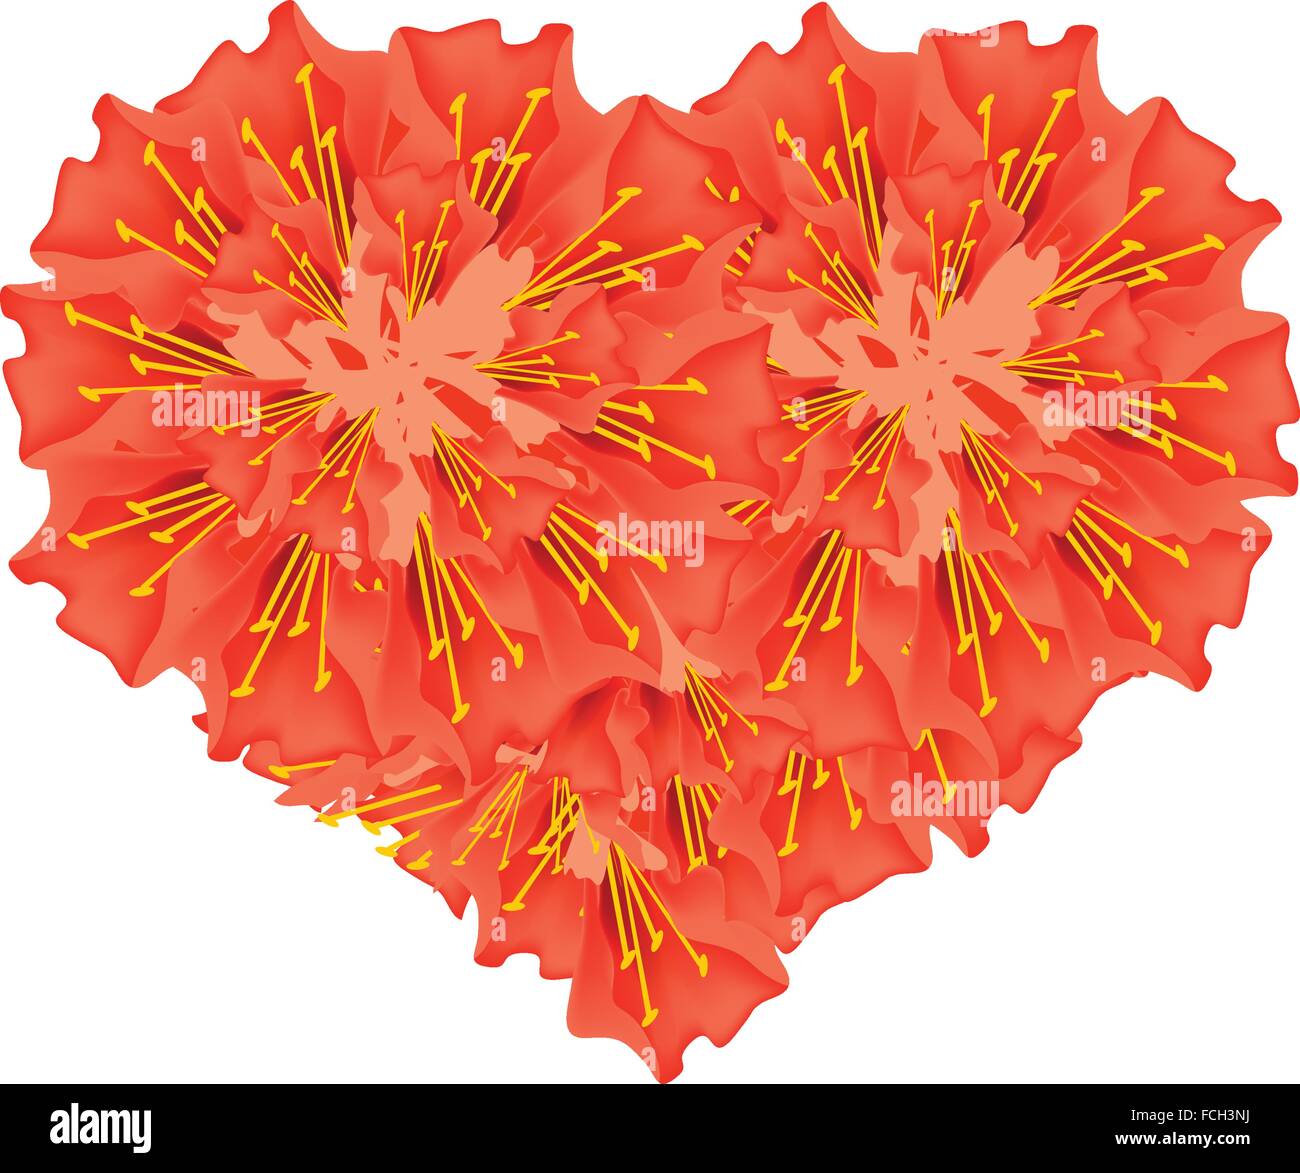 Love Concept, Illustration of Rose of Venezuela, Scarlet Flame Bean or Brownea Ariza Flowers Forming in Heart Shape Isolated on Stock Vector